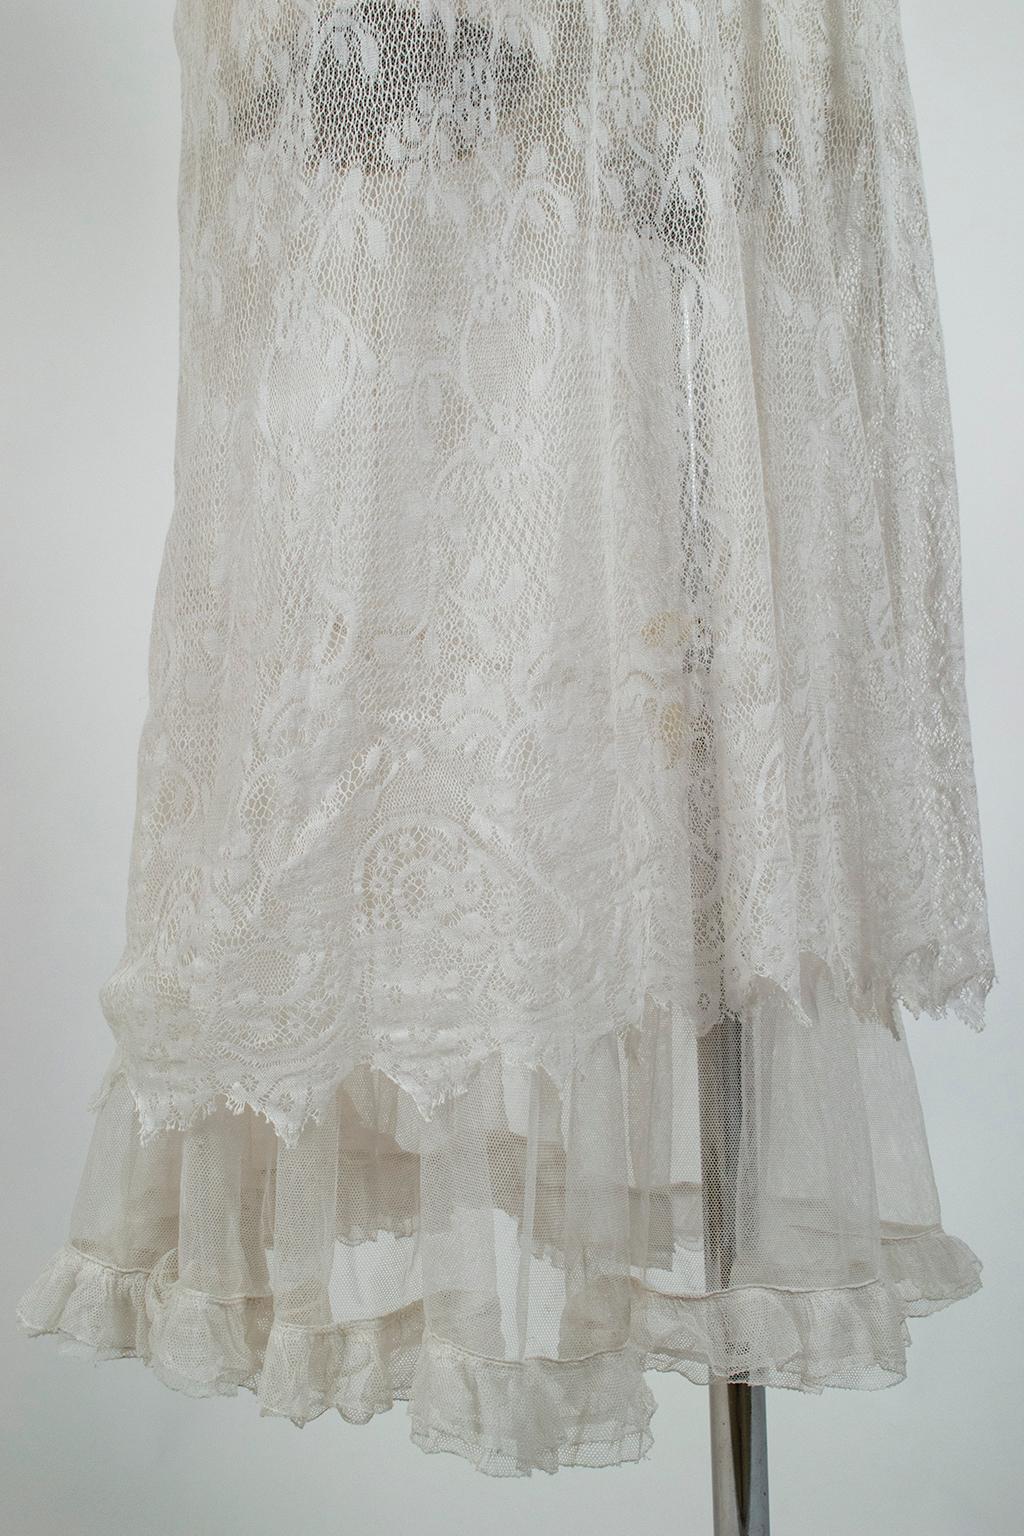 White Edwardian Net Rosebud Afternoon Tea or Bridal Gown - XXS, Early 1900s For Sale 9